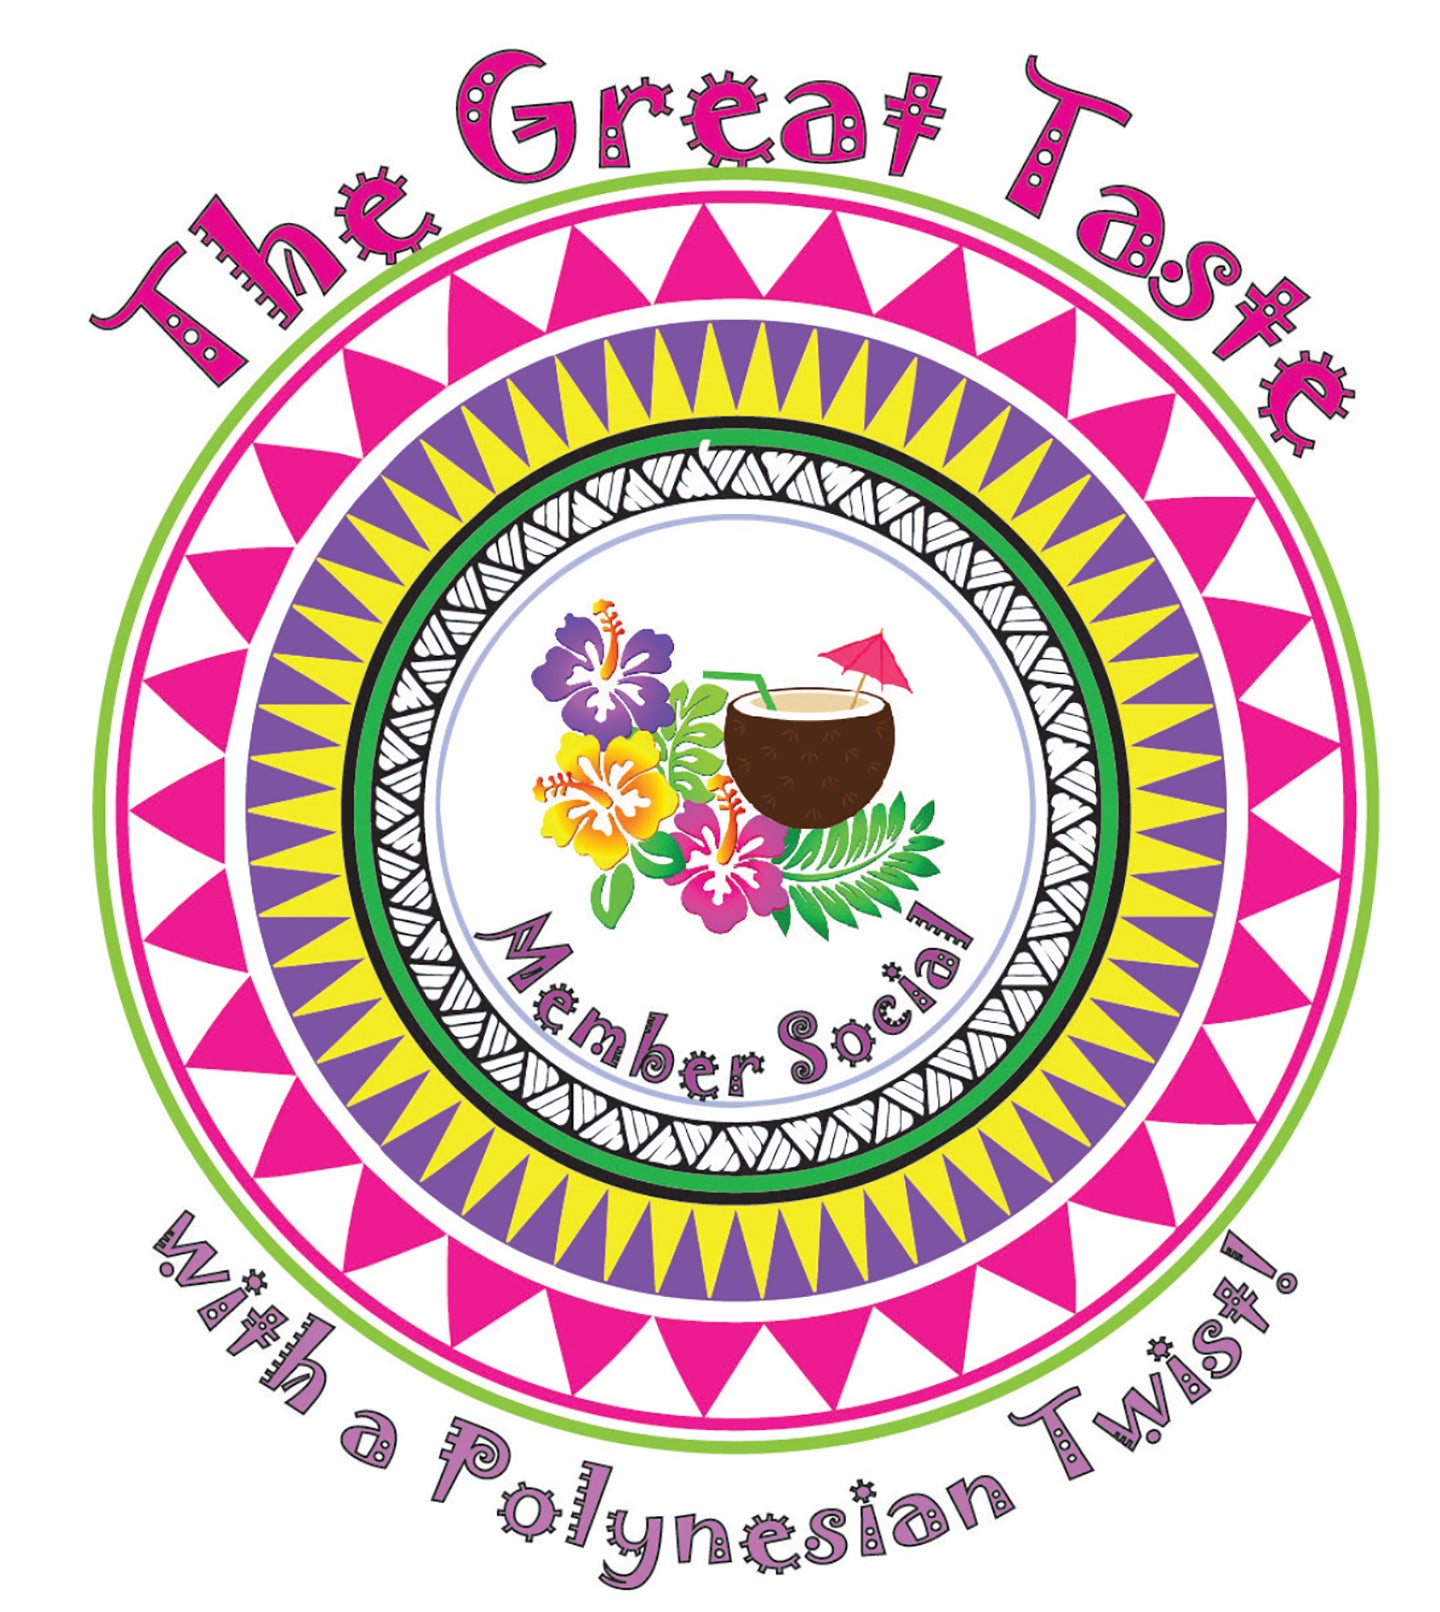 Chamber to hold The Great Taste event The Coastland Times The